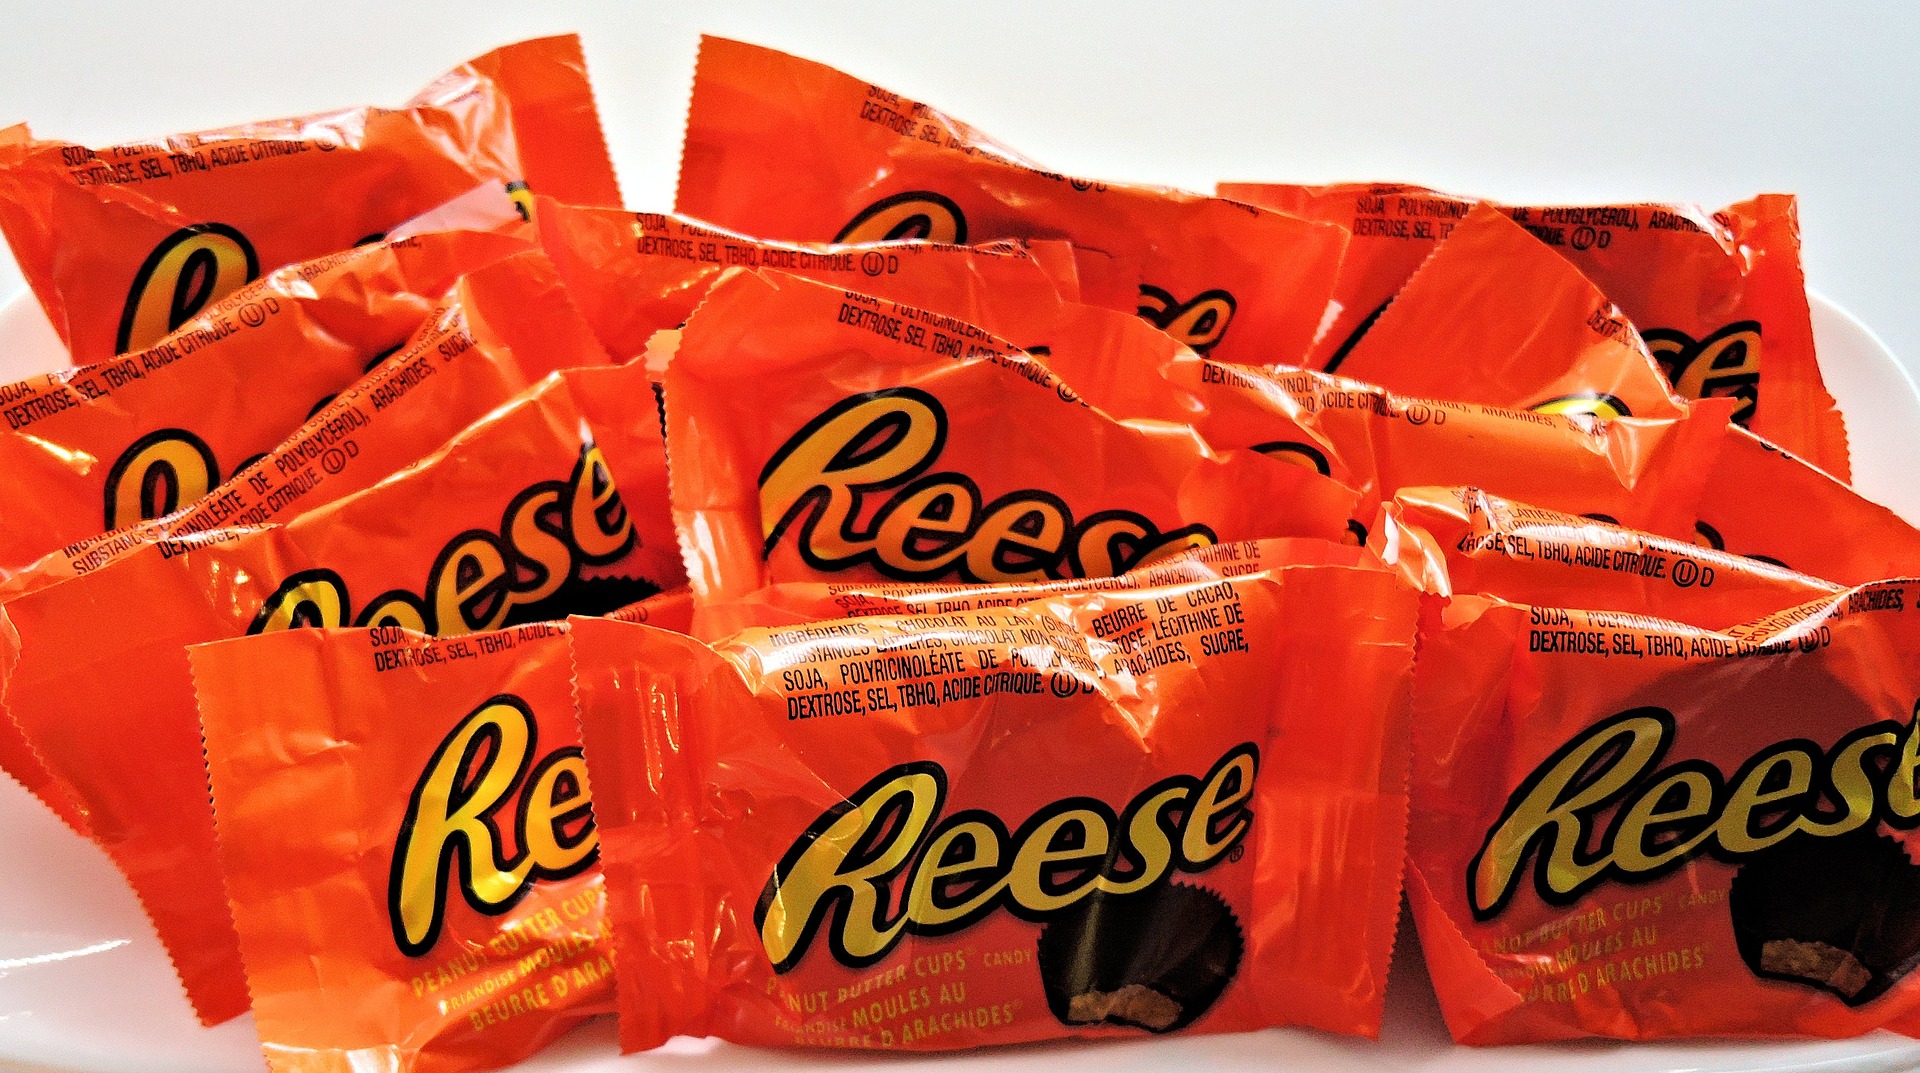 Reese's peanut butter cups in their packaging. 